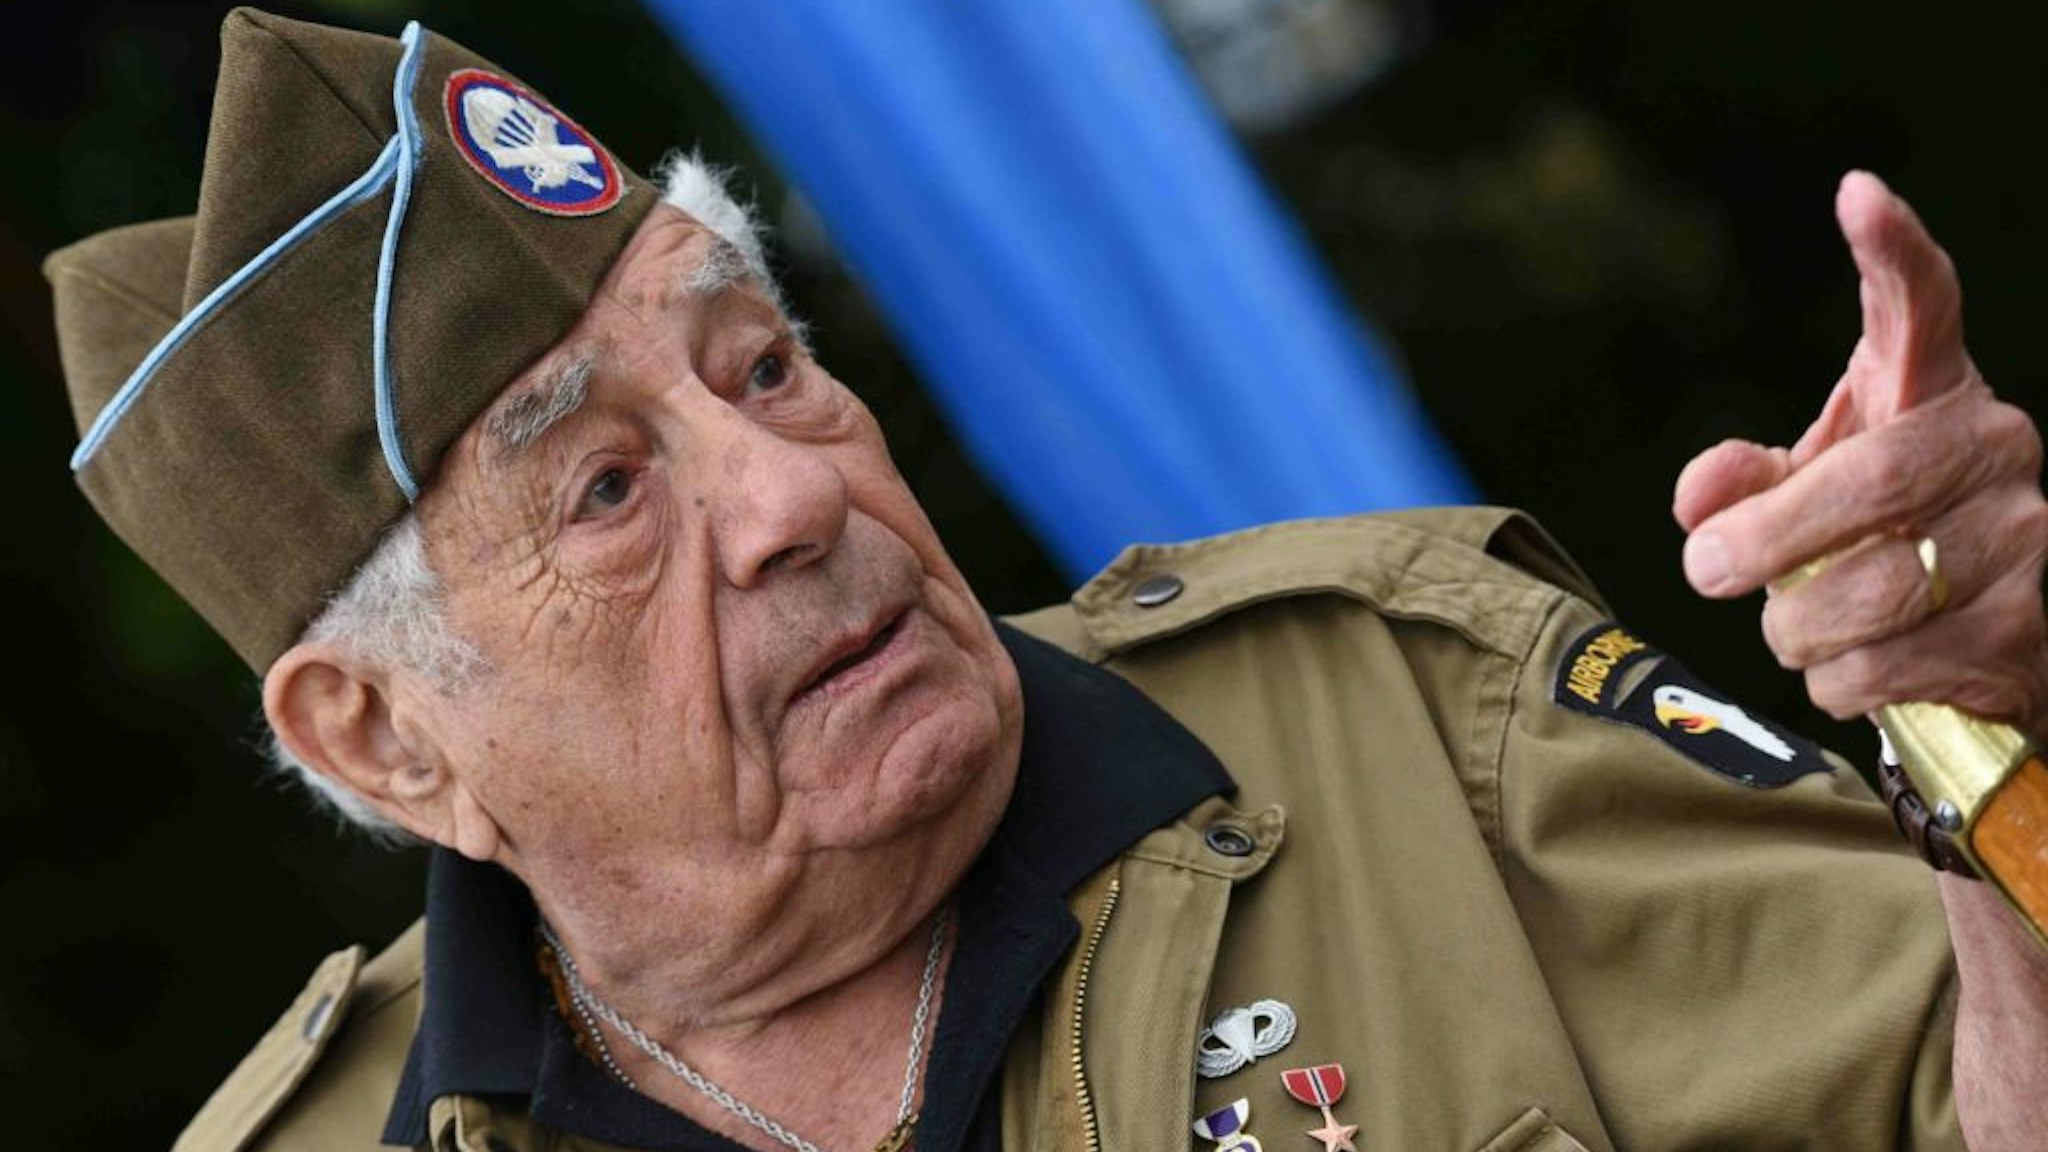 Celebrations for the 75th Anniversary of the Normandy Landings: American soldiers of the 101st Airborne Division parachuted into the Carentan Marsh on June 5, 2019, under the watchful eye of Tom Rice (97 years old) and a few other veterans, including here Vincent Speranza. (Photo by: Desfoux/Andia/Universal Images Group via Getty Images)